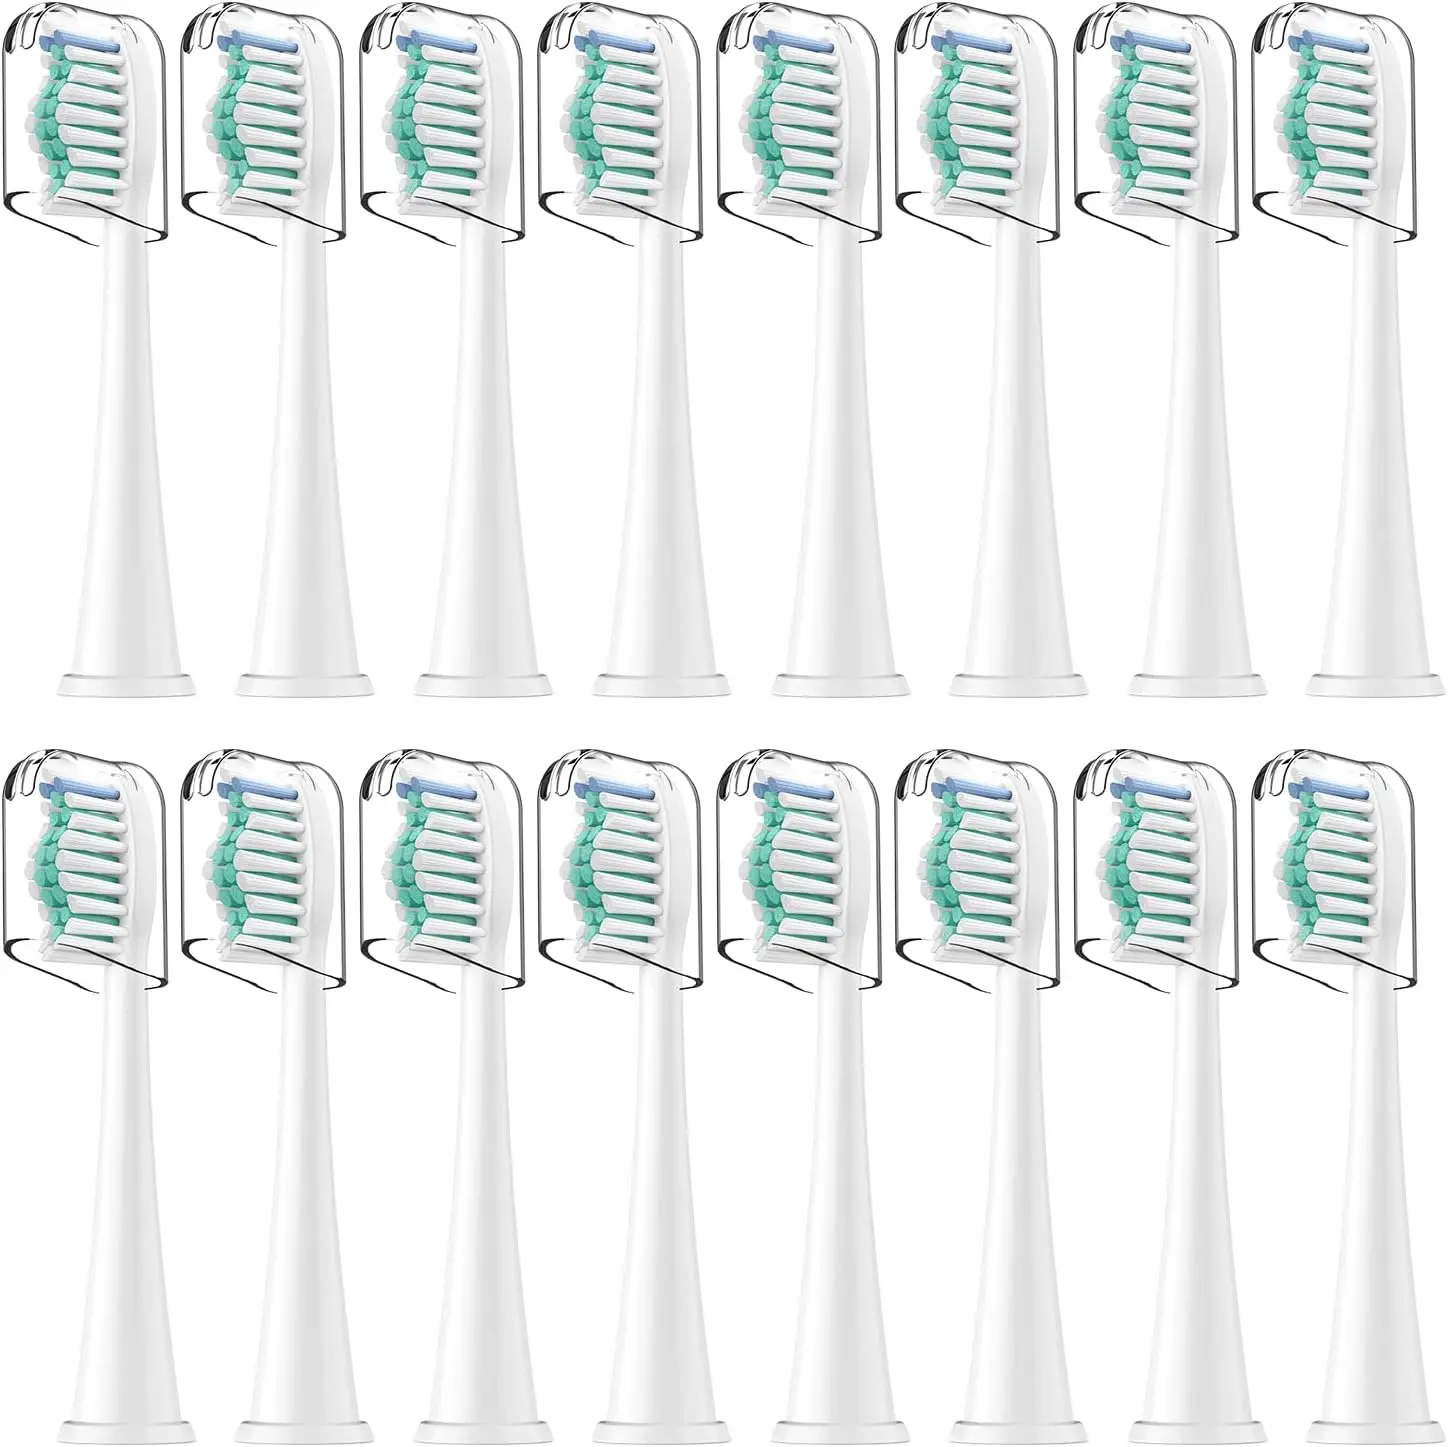 4/8/12/16/20PCS Teeth Whitening Replacement Toothbrush Heads for Phi lips Sonc Care Series toothbrush heads electric toothbrush with battery for adult soft bristle waterproof oral hygiene teeth whitening with replacement brush heads set